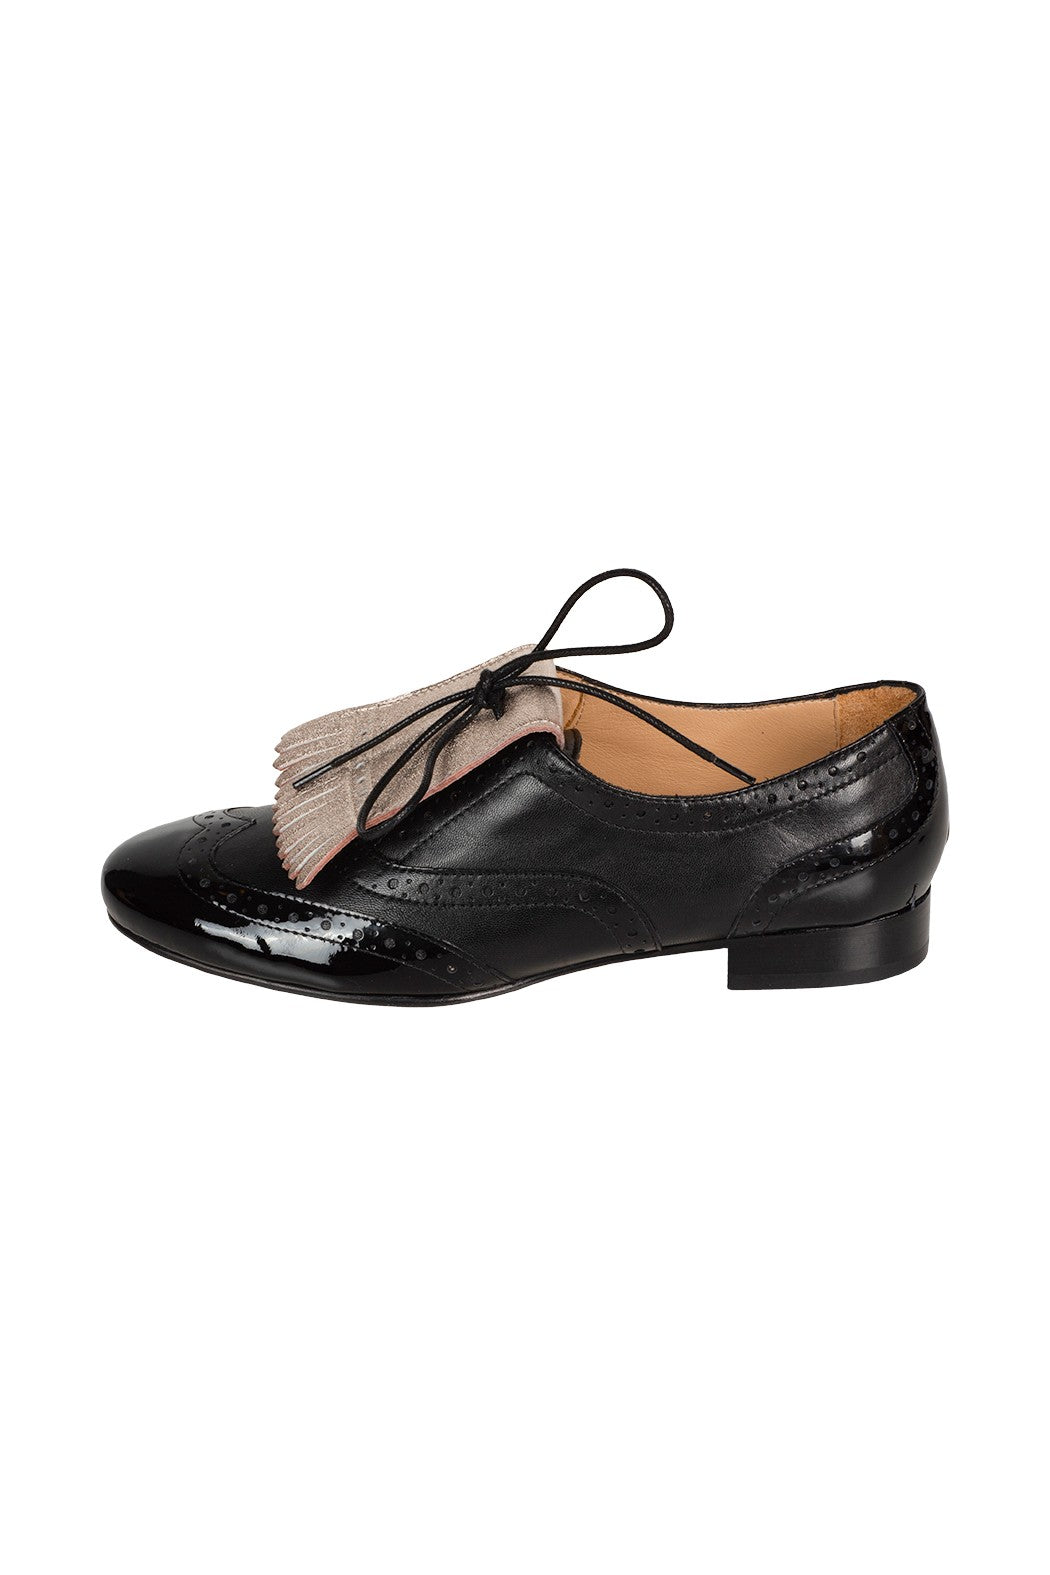 Black italian leather brogues with detachable and reversible nude metallic fringe 